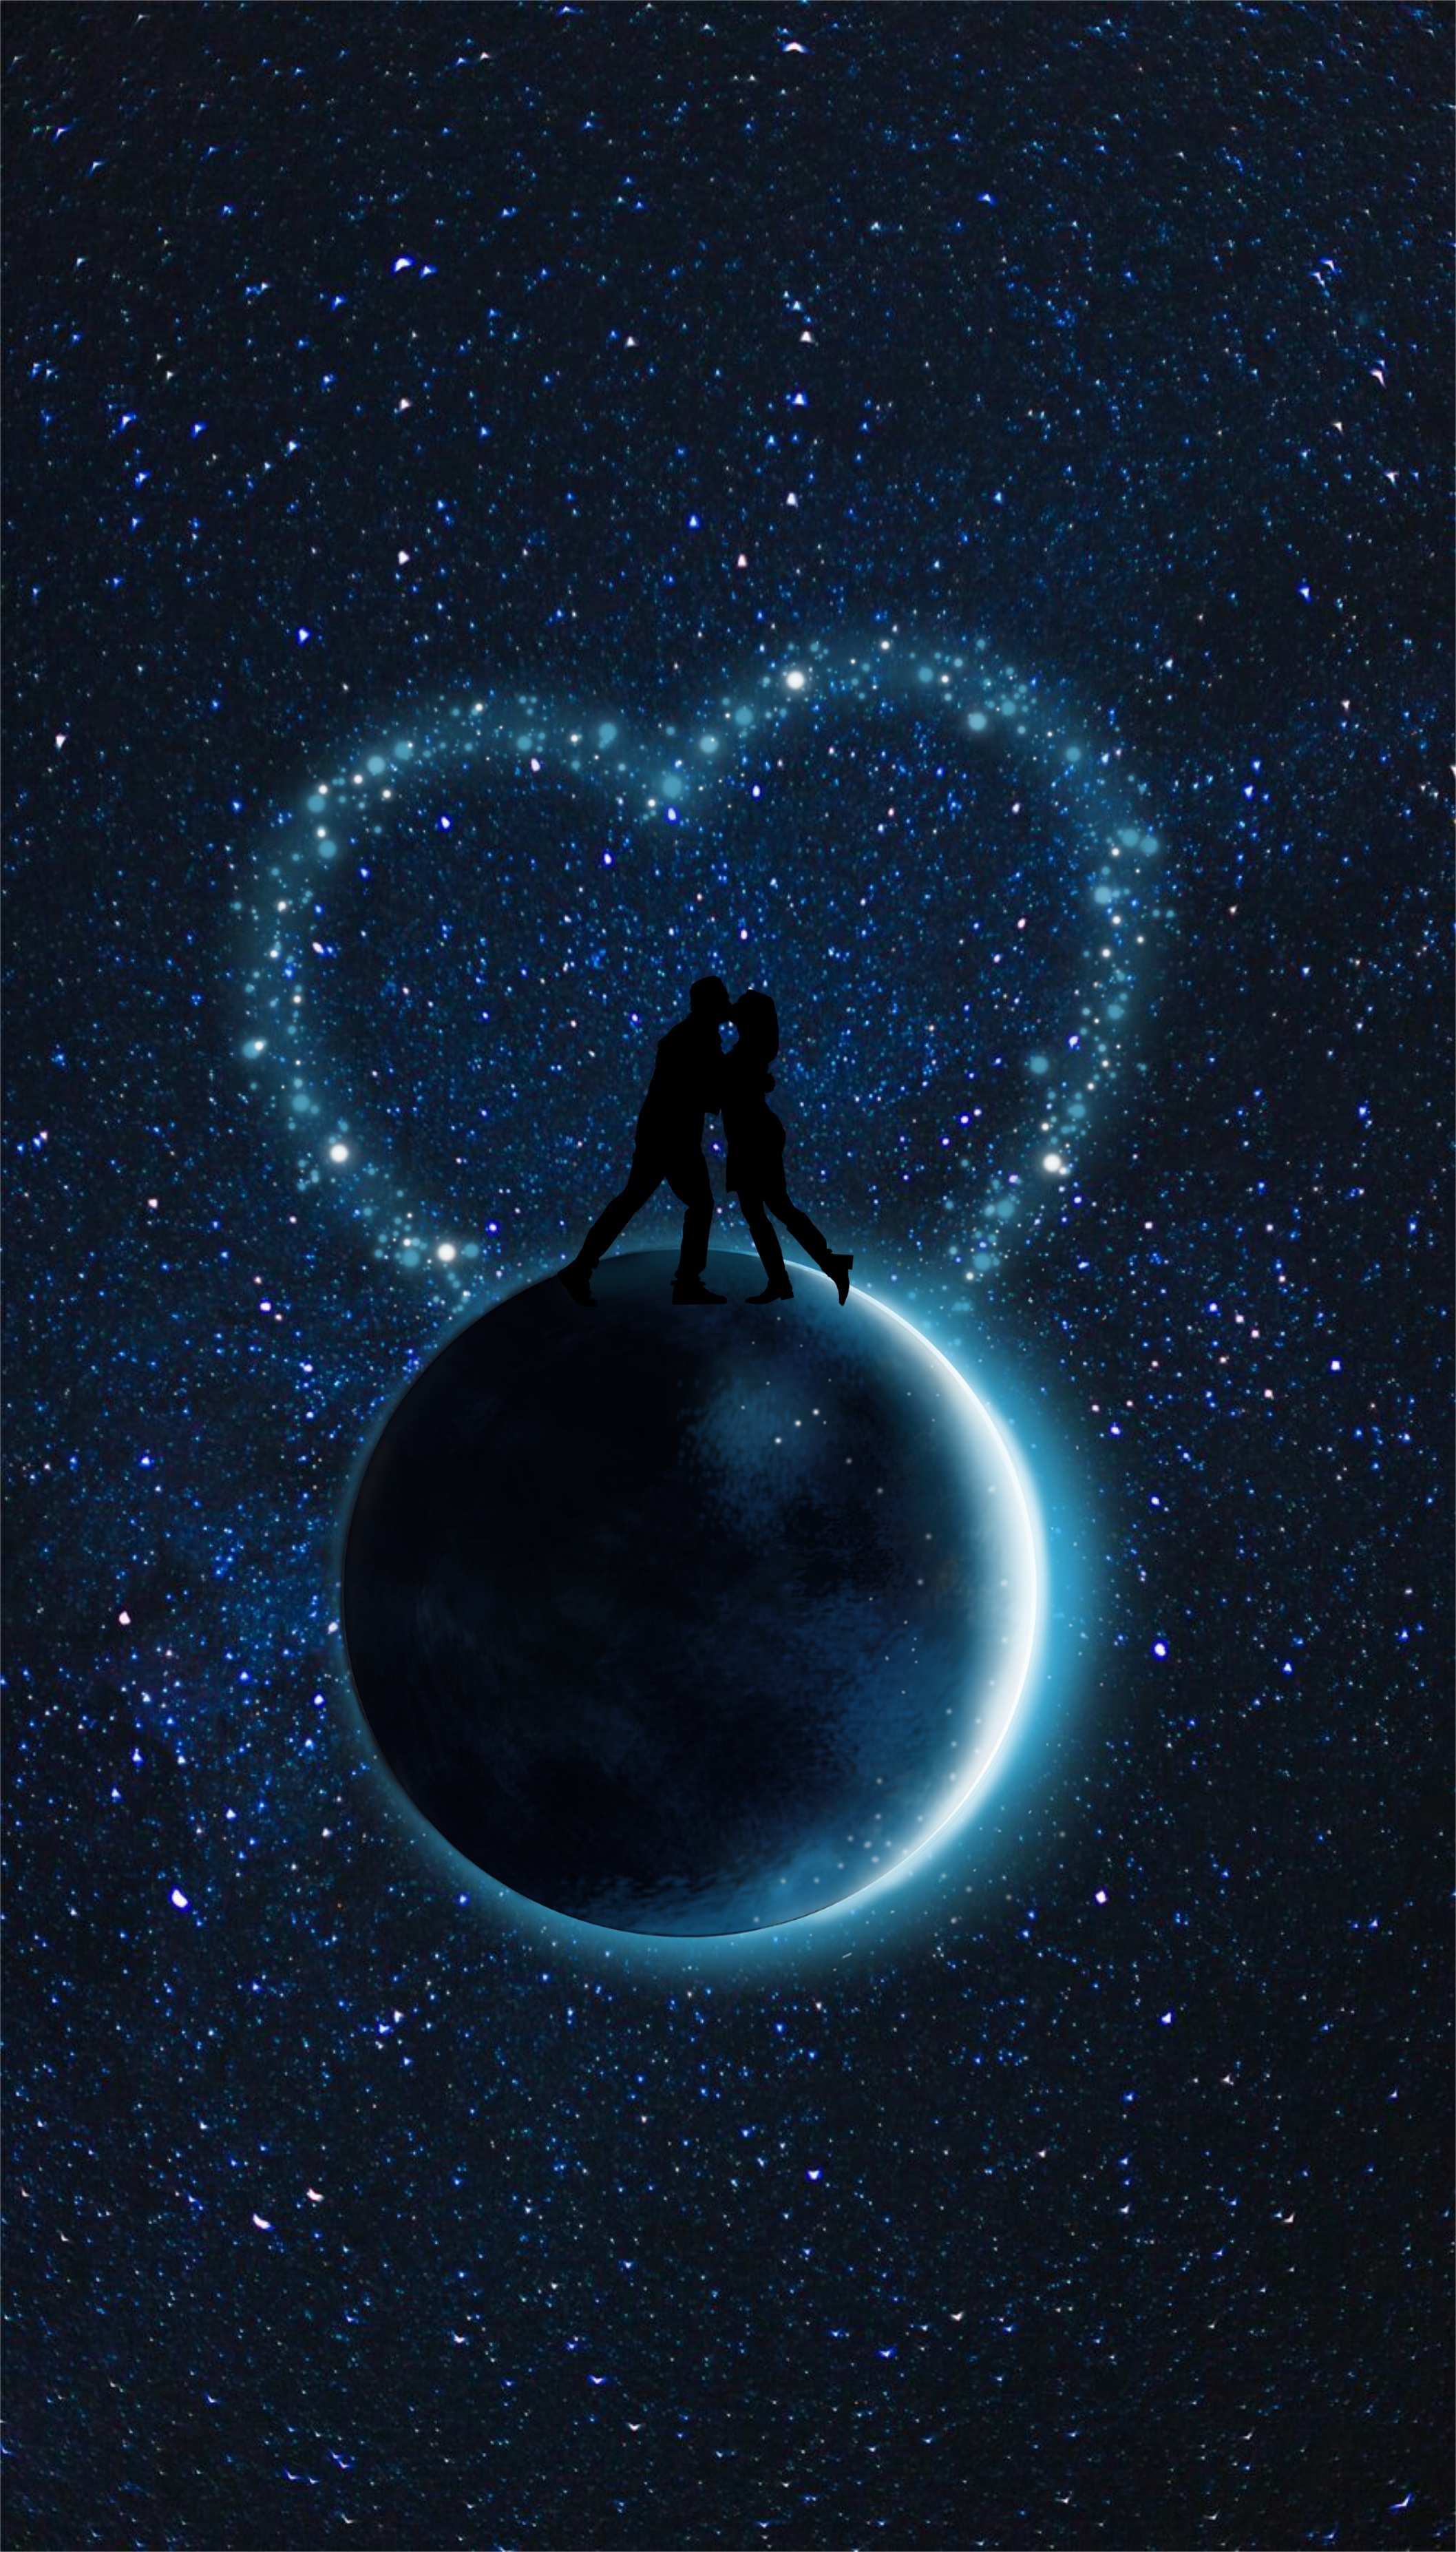 android love, couple, pair, vector, silhouettes, starry sky, planet